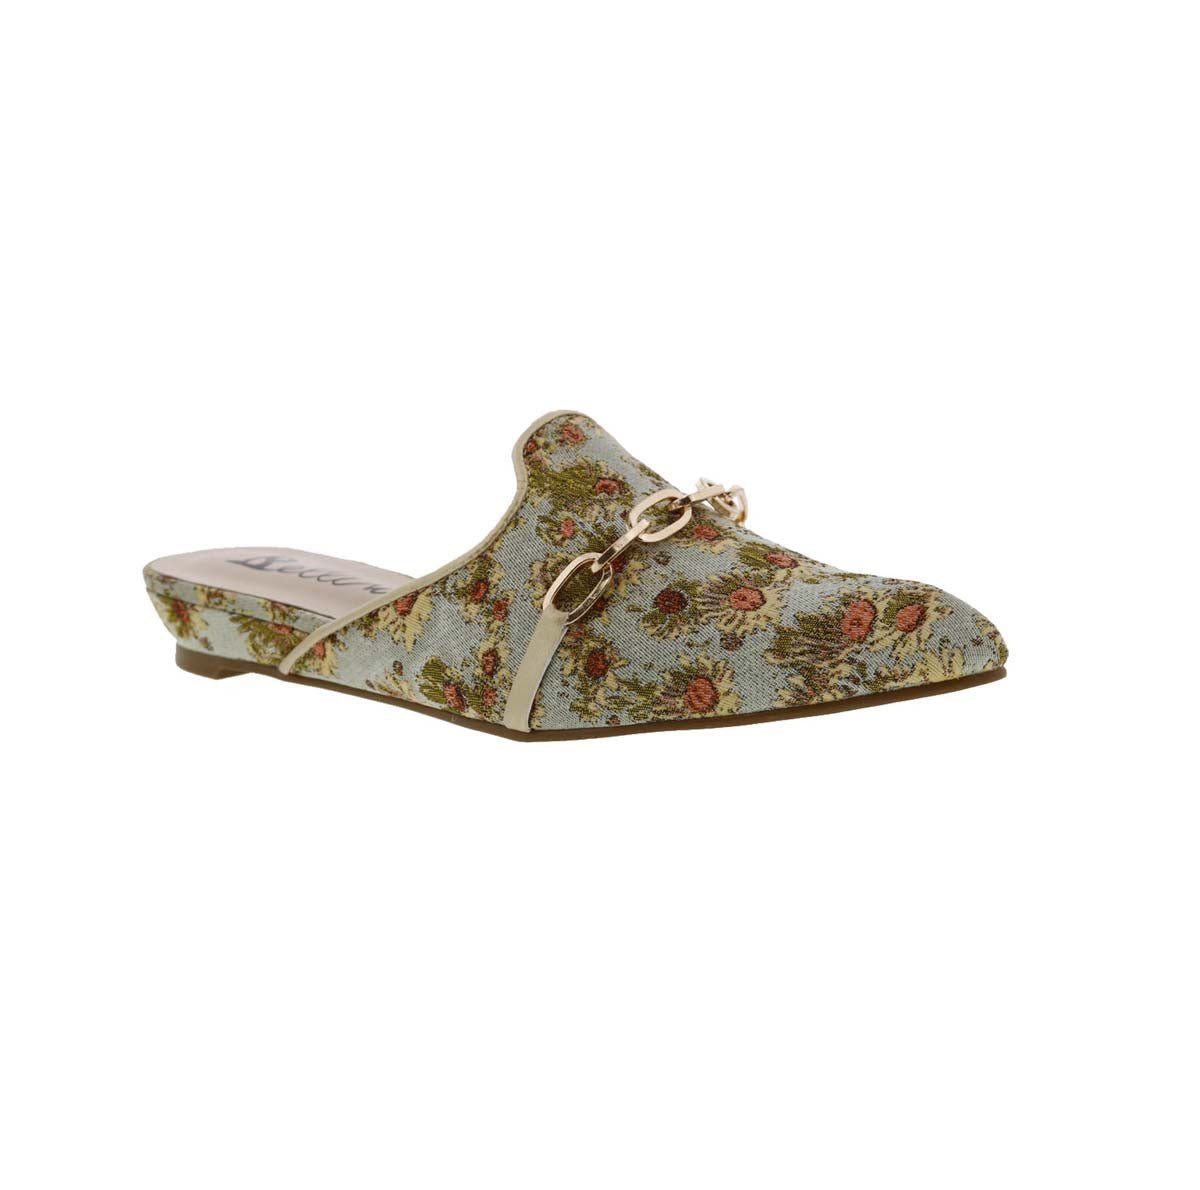 BELLINI FLUENT WOMEN SLIP-ON MULE SHOES IN GOLD FLORAL PRINT - TLW Shoes